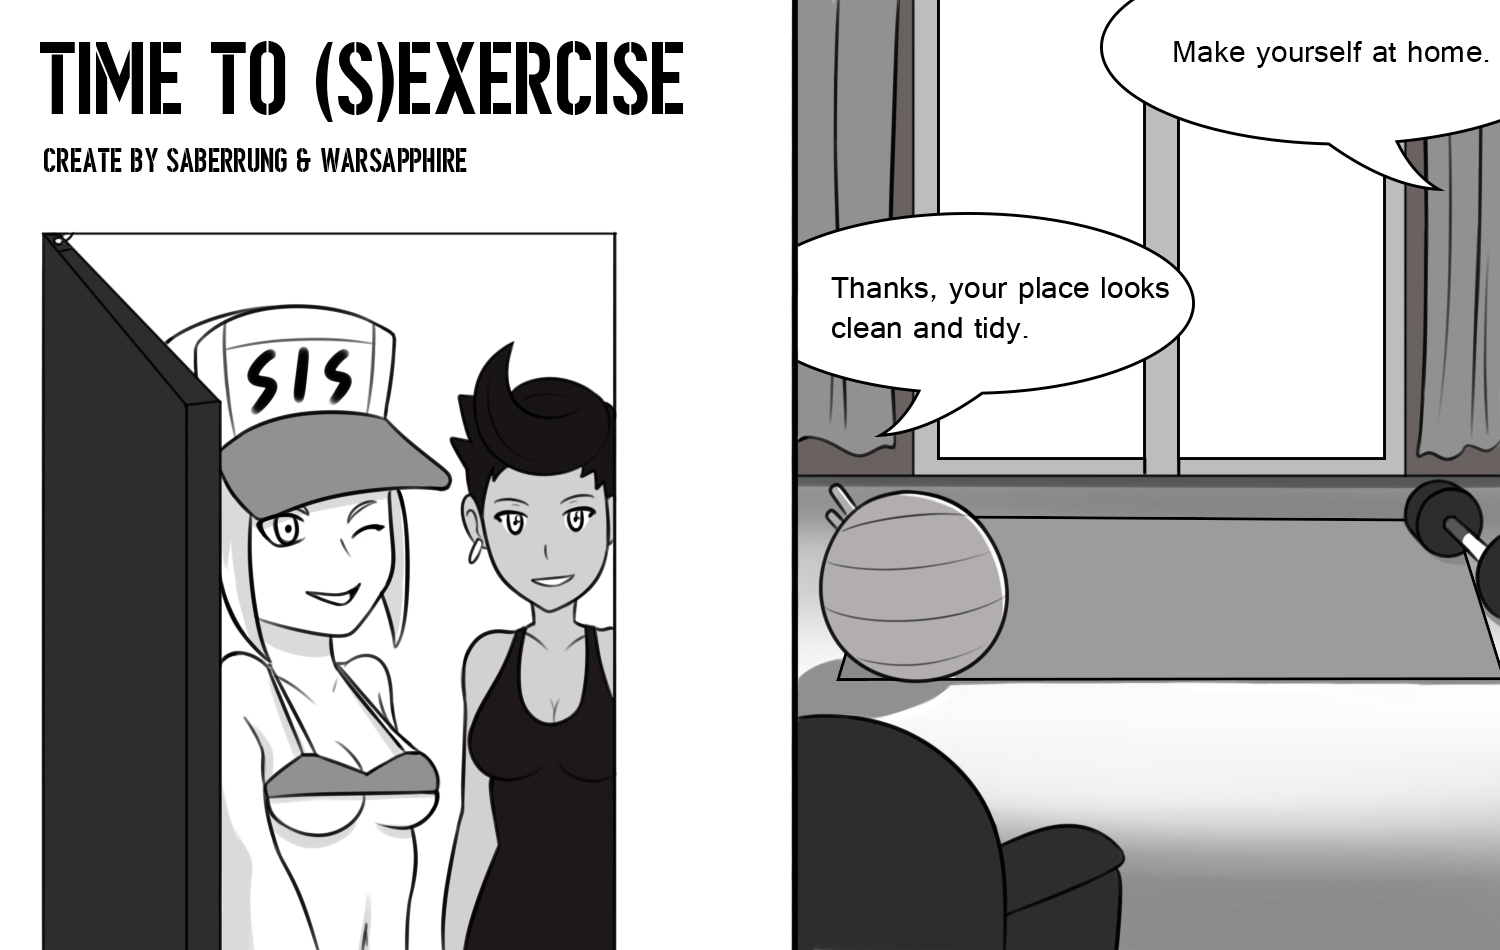 1：Time_to_sexercise_p1.jpg